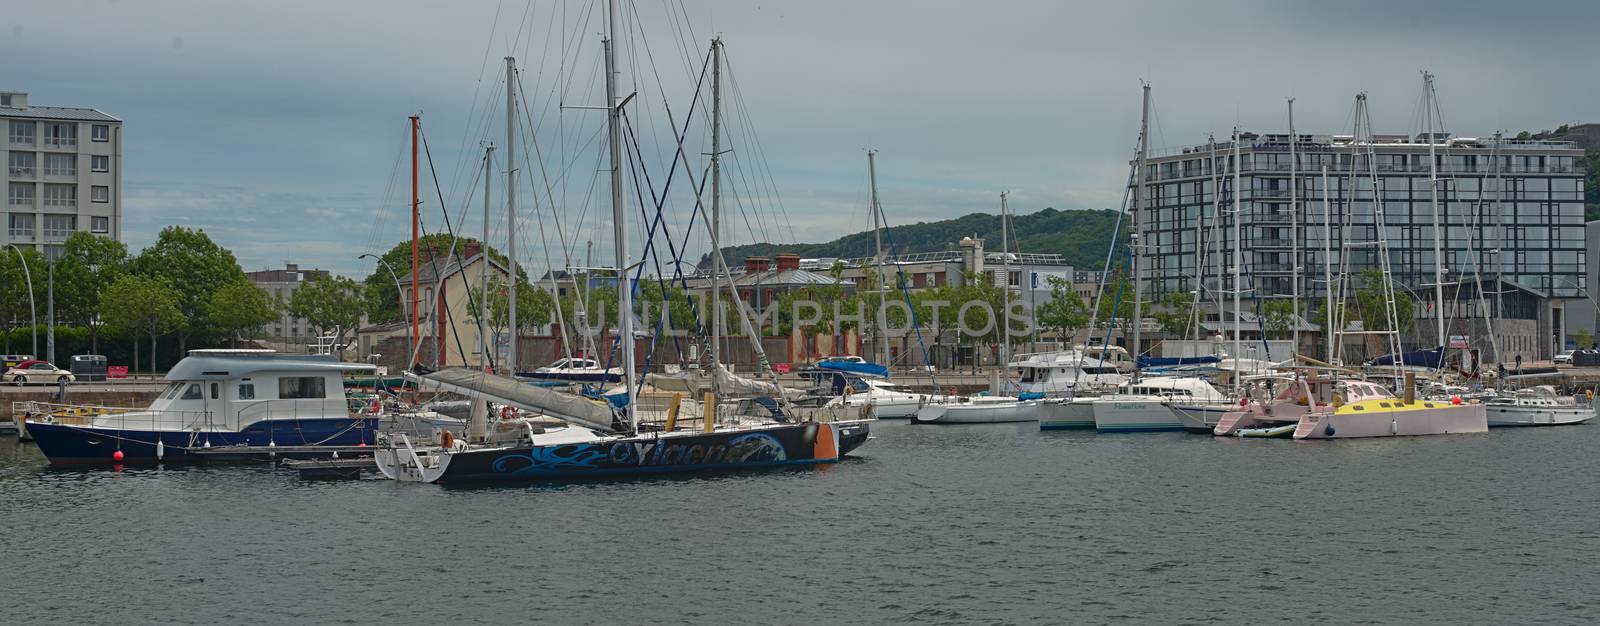 CHERBOURG, FRANCE - June 6th 2019 - Harbor with docked boats by sheriffkule